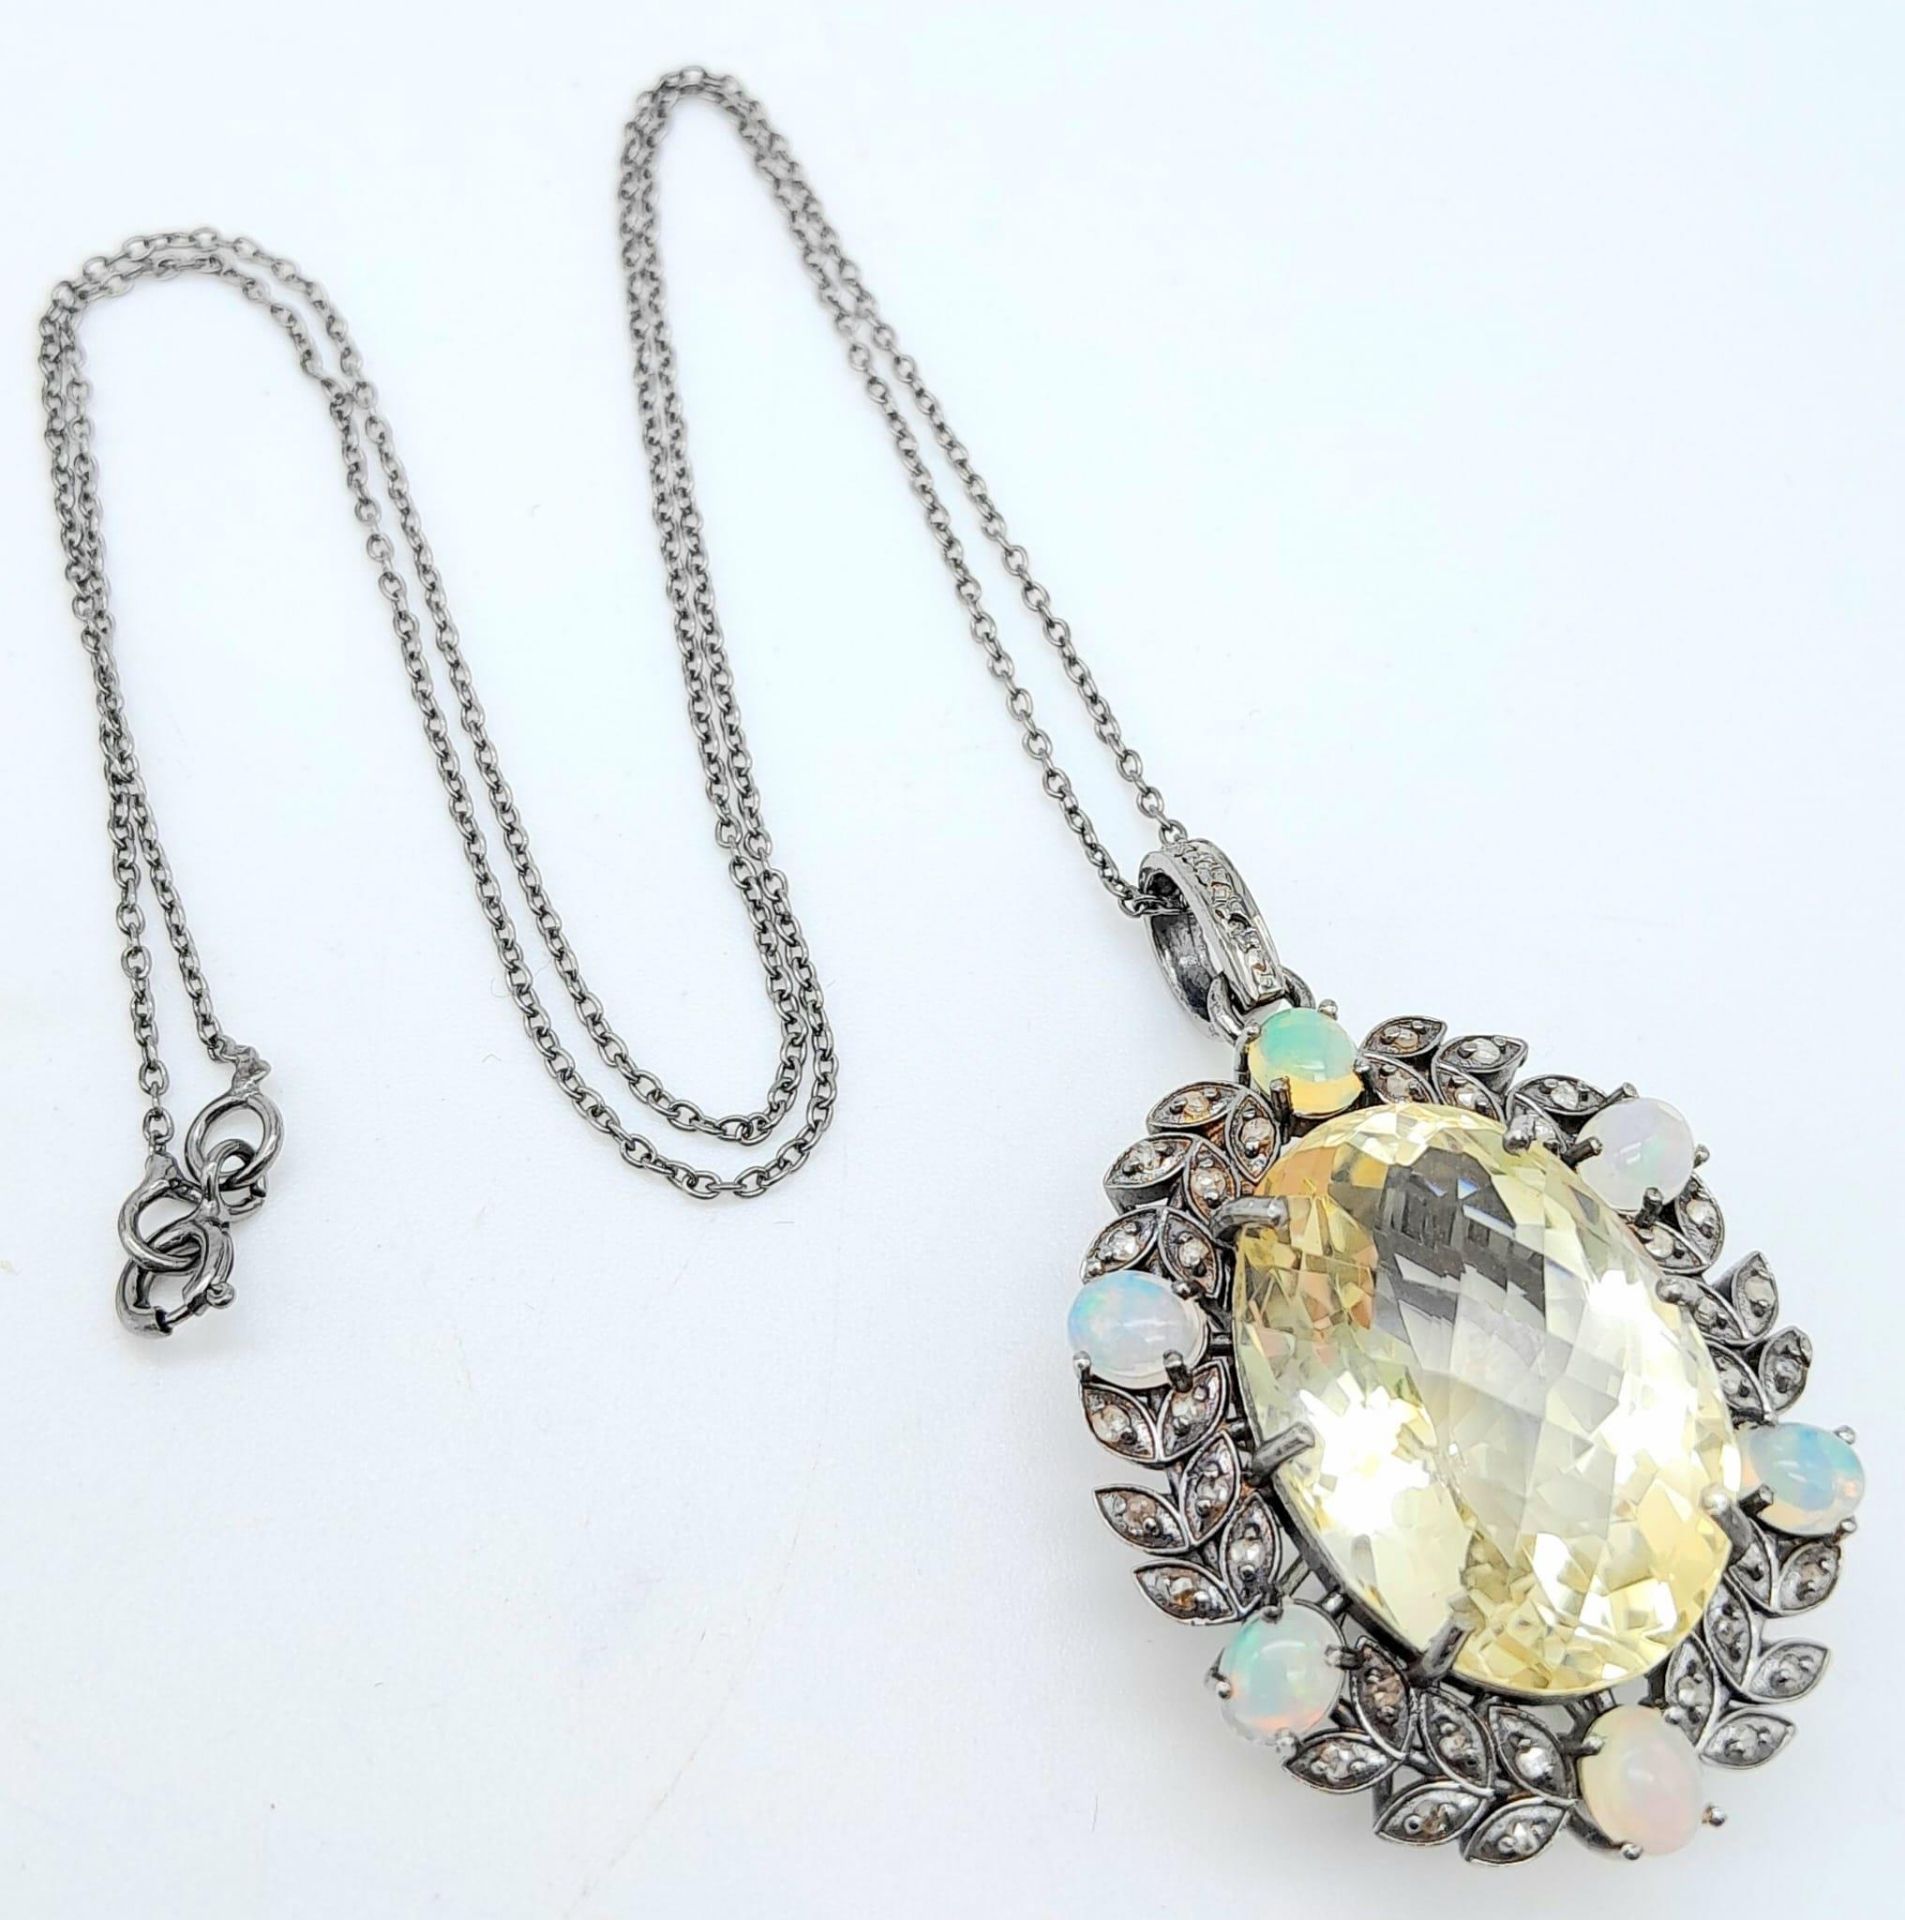 A Citrine Pendant with Opal and Diamond Surround on 925 Silver Chain.22ct citrine, 1.30ctw opals,